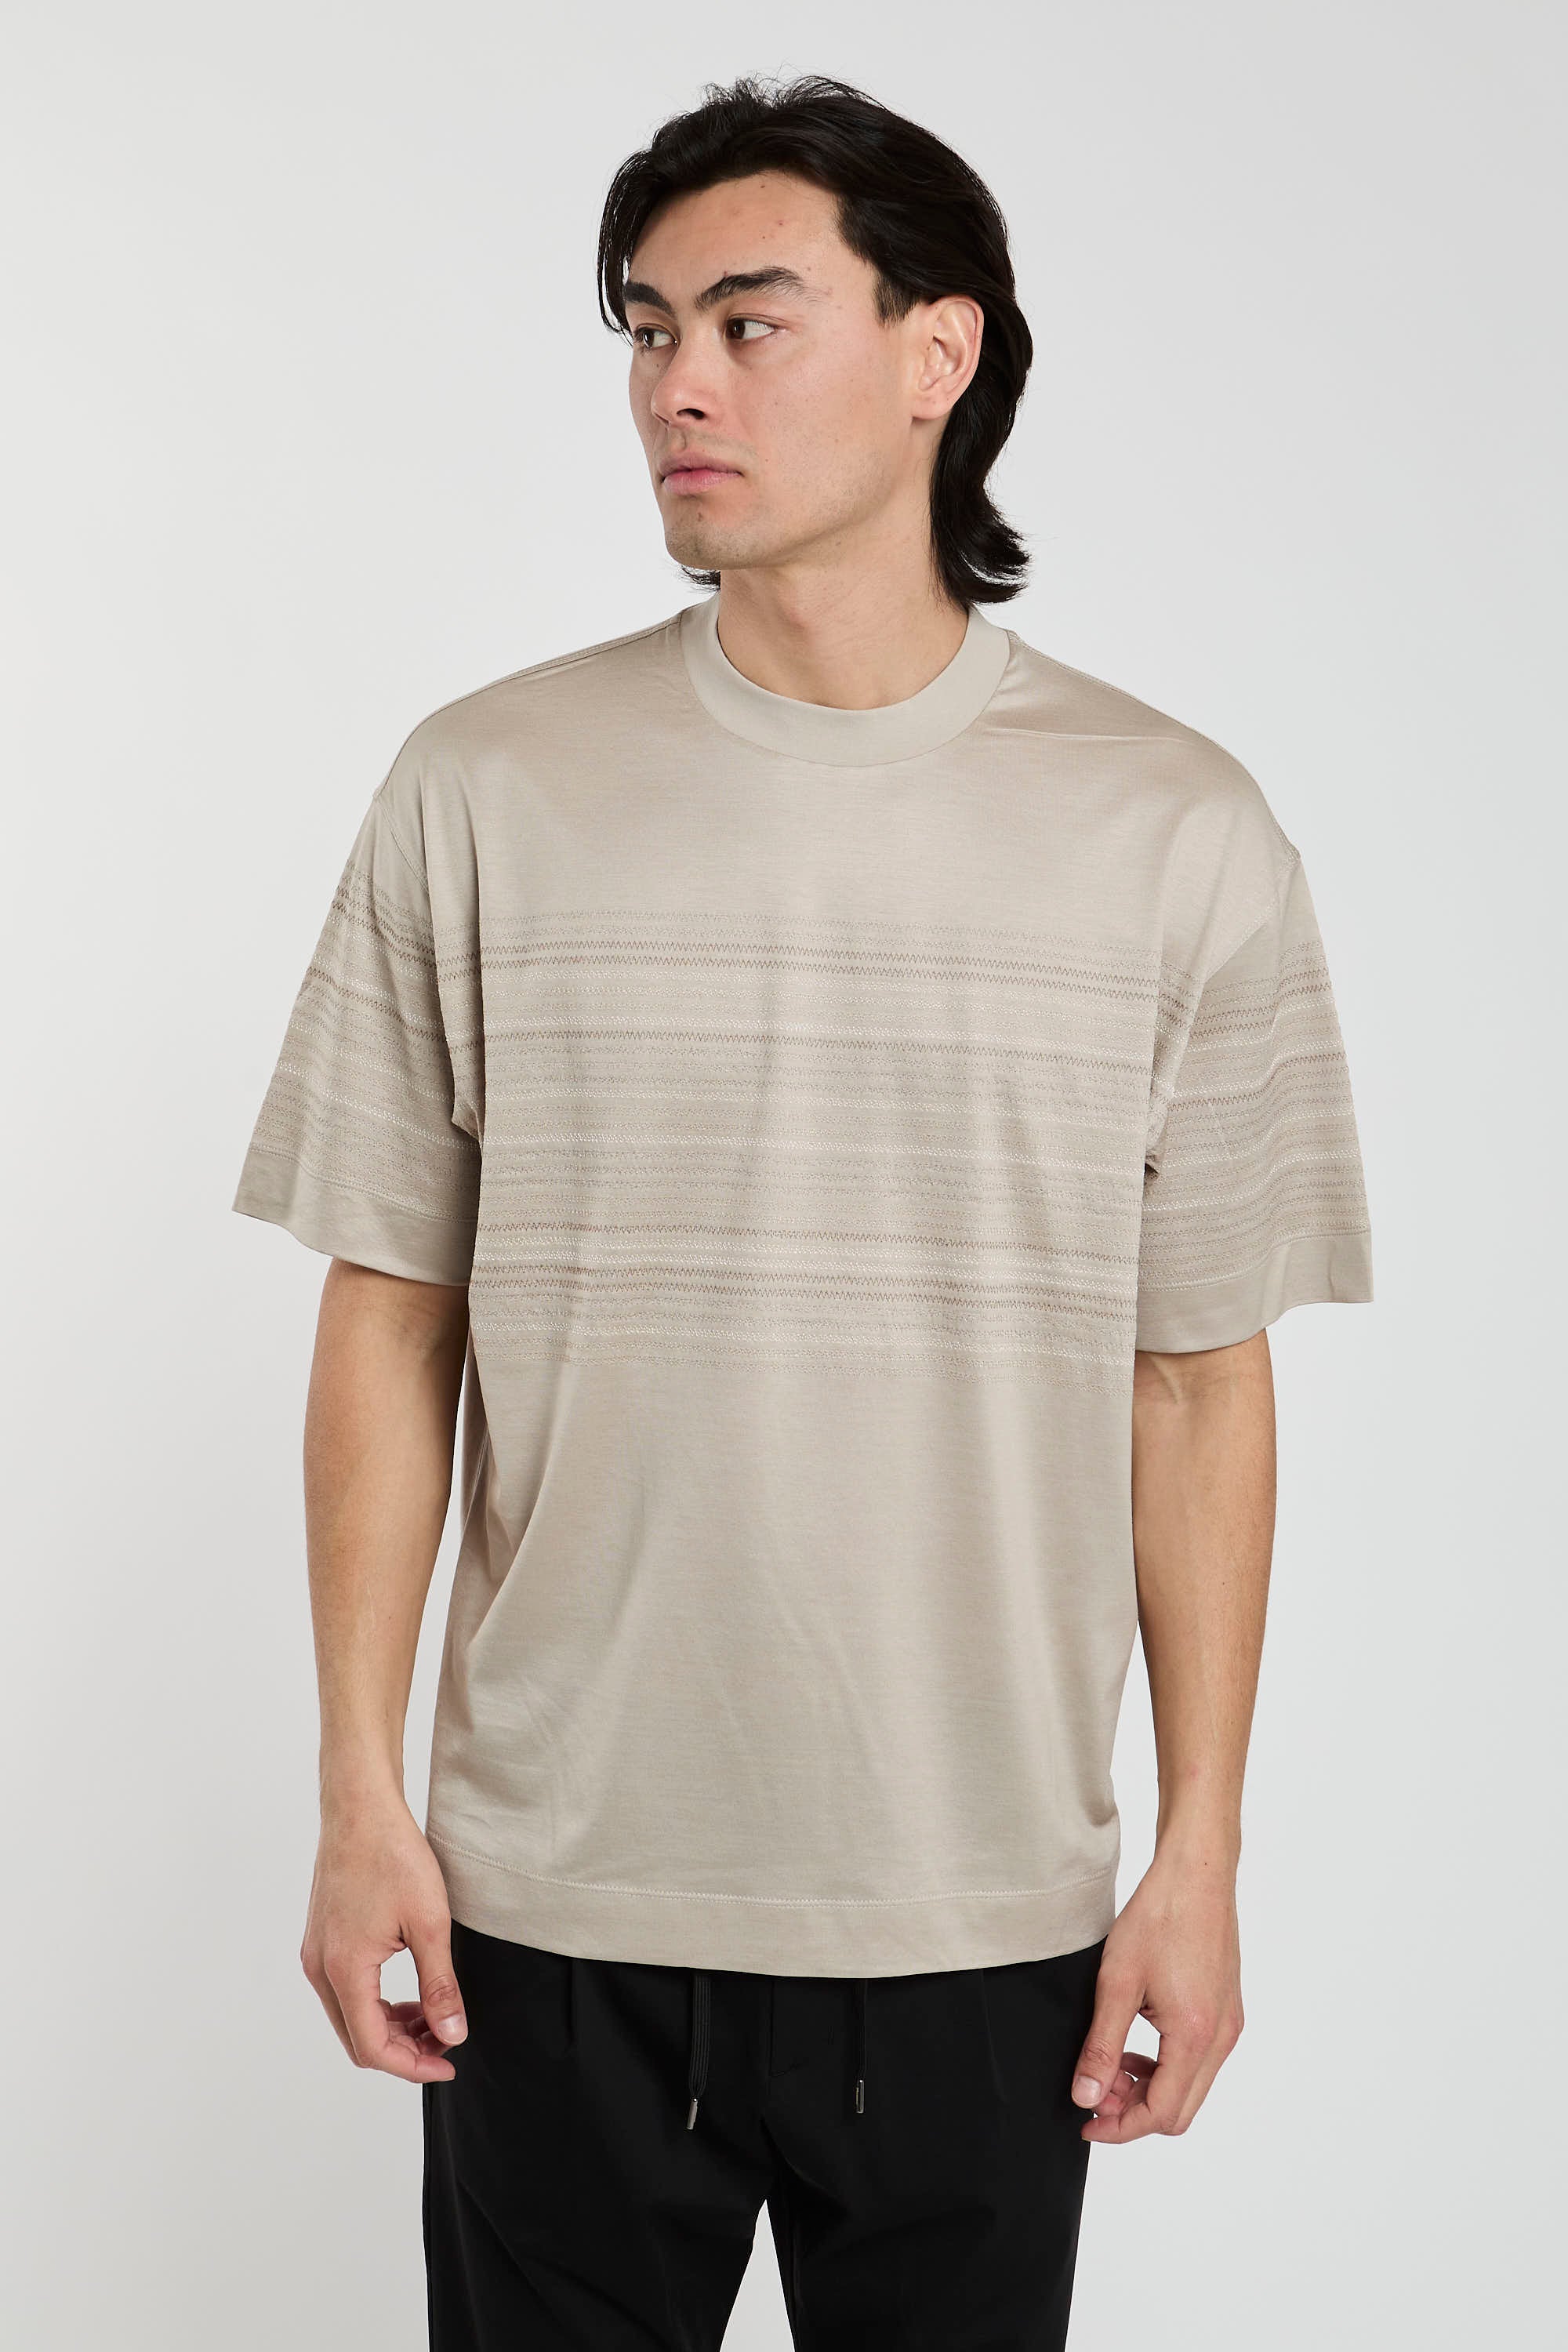 Emporio Armani Silver T-Shirt in Cotton and Lyocell Blend Jersey-1